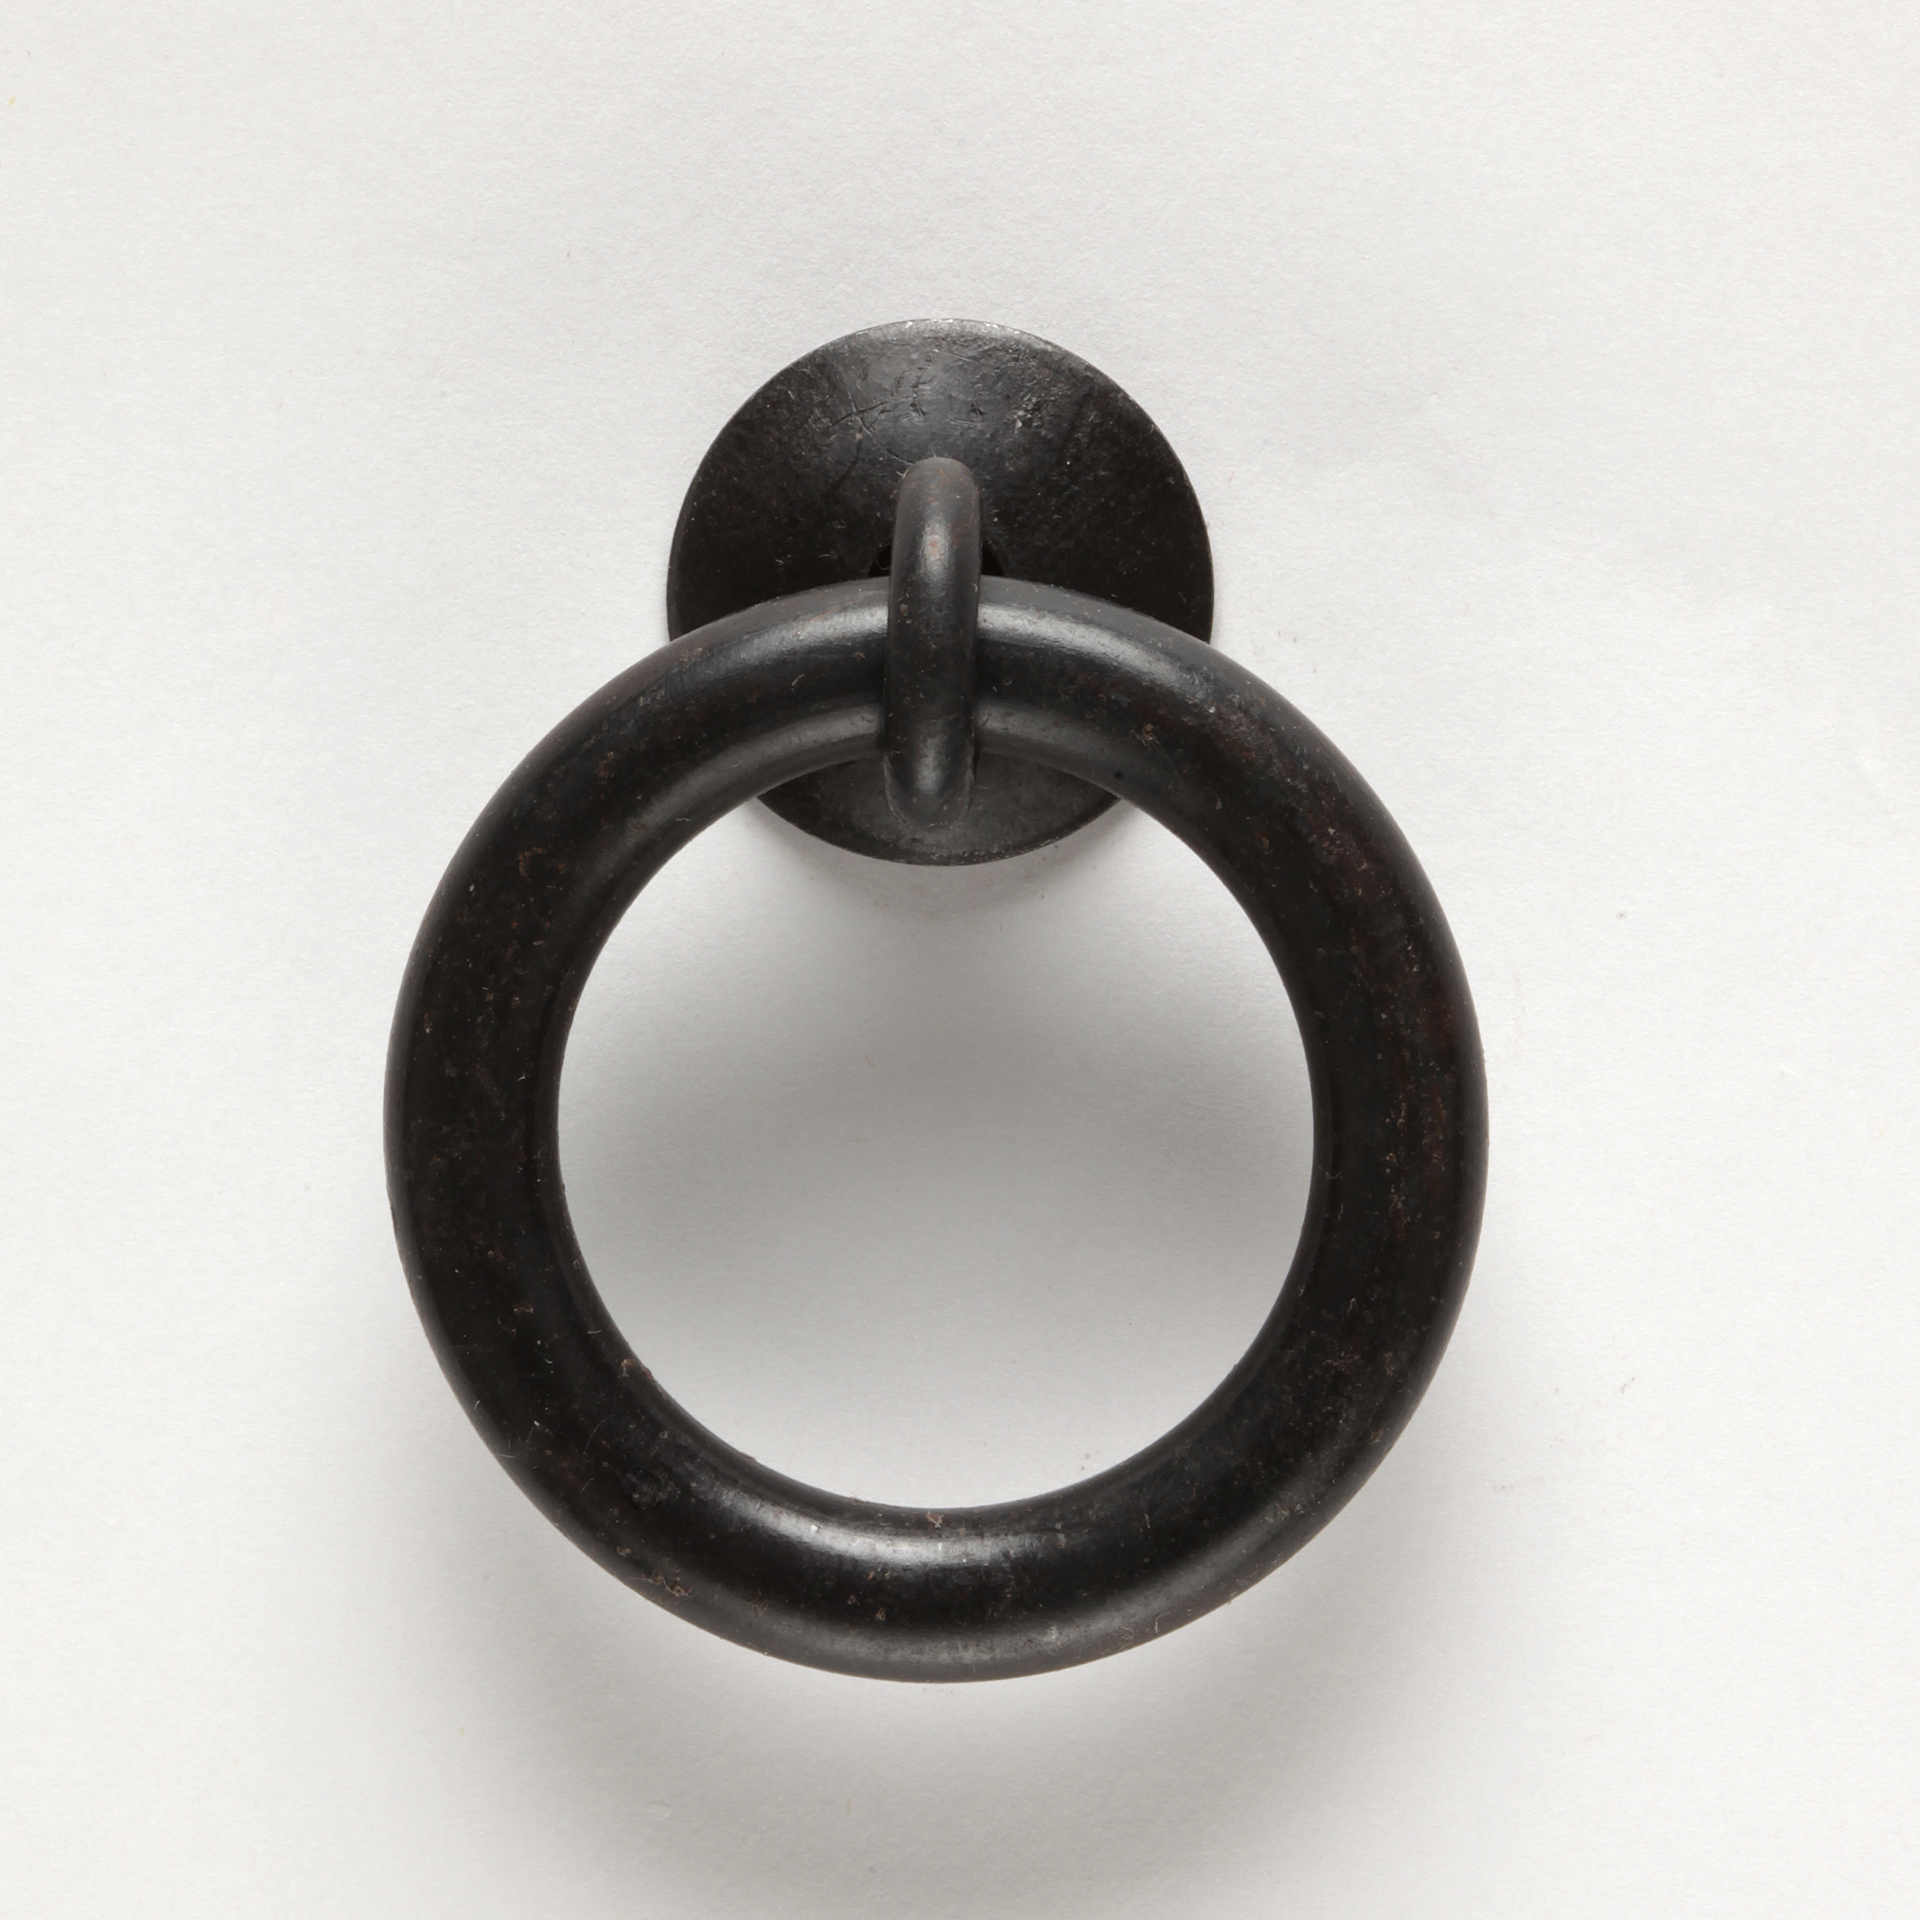 Door Pulls - Large Thick Ring Pull 0104-11 - Northern Crescent Iron